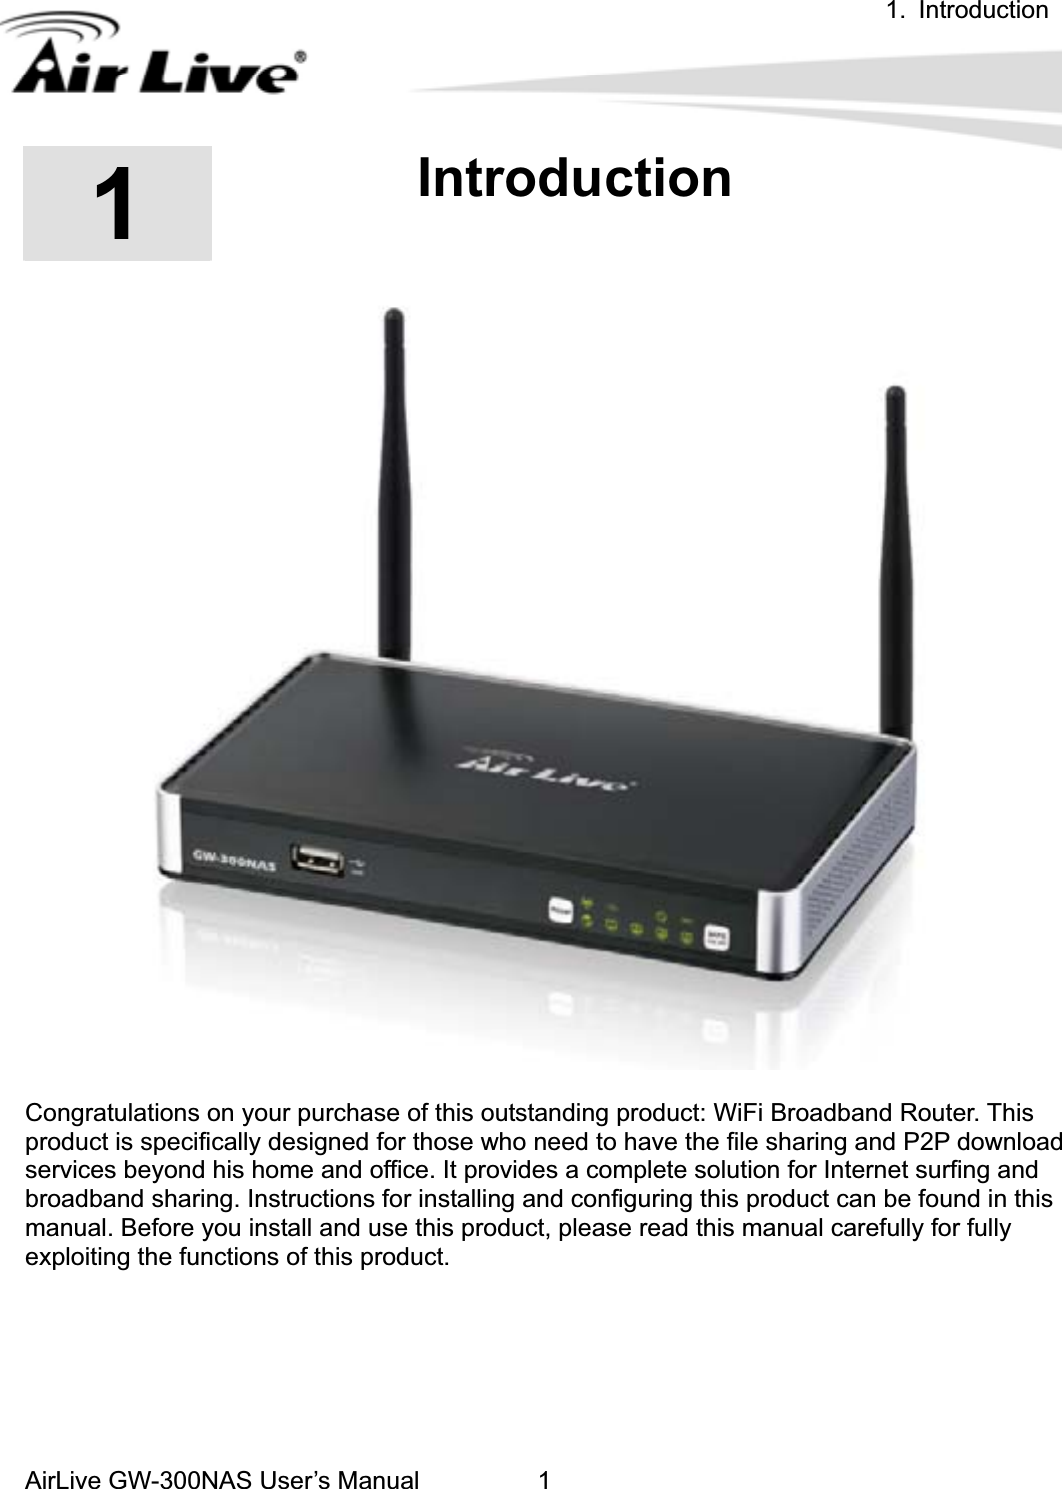 1. IntroductionAirLive GW-300NAS User’s Manual 111.IntroductionCongratulations on your purchase of this outstanding product: WiFi Broadband Router. This product is specifically designed for those who need to have the file sharing and P2P download services beyond his home and office. It provides a complete solution for Internet surfing and broadband sharing. Instructions for installing and configuring this product can be found in this manual. Before you install and use this product, please read this manual carefully for fully exploiting the functions of this product. 